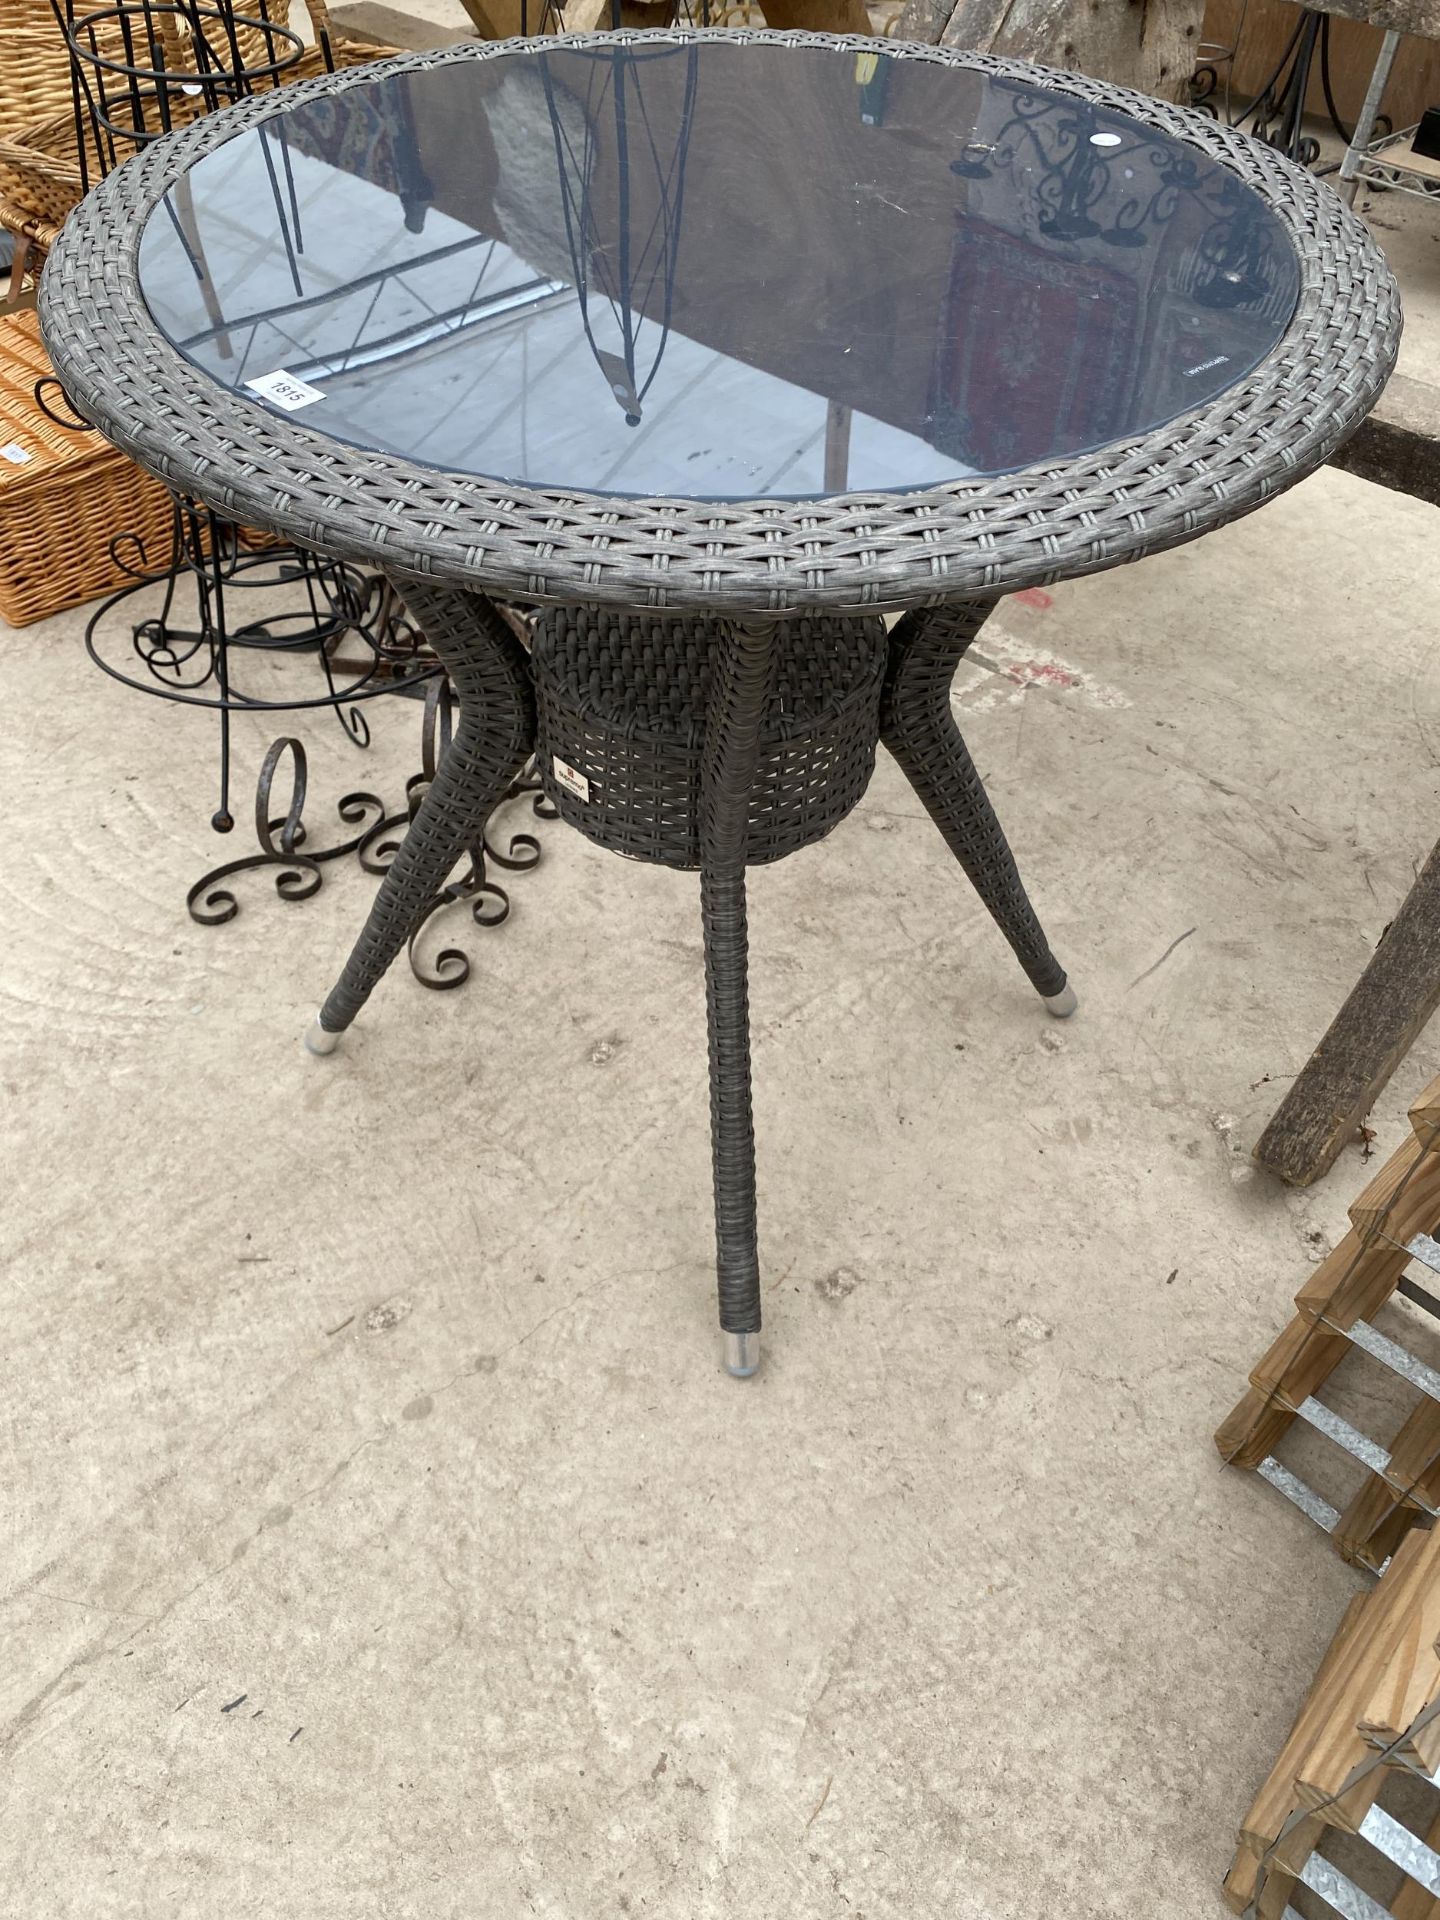 A RATTAN GLASS TOPPED BISTRO TABLE